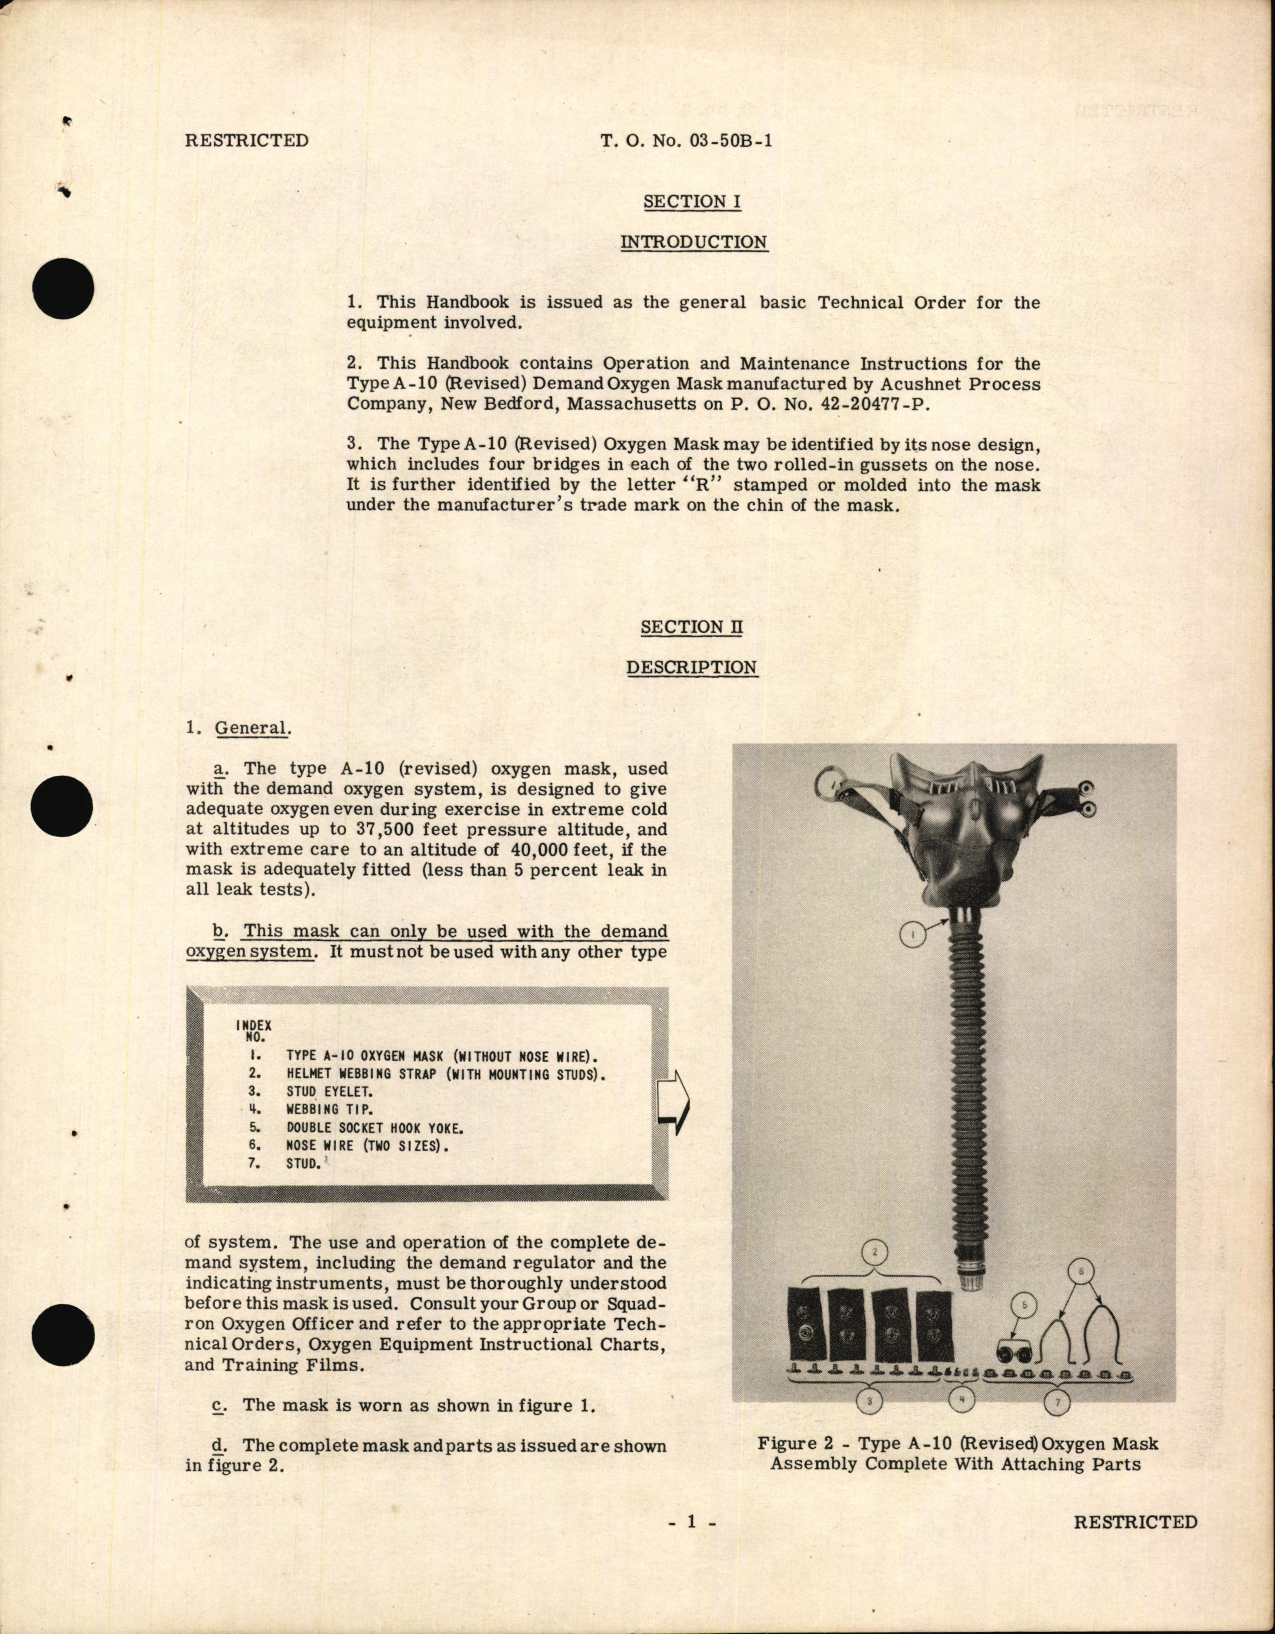 Sample page 5 from AirCorps Library document: Handbook of Instructions with Parts Catalog for Type A-10 Revised Oxygen Mask